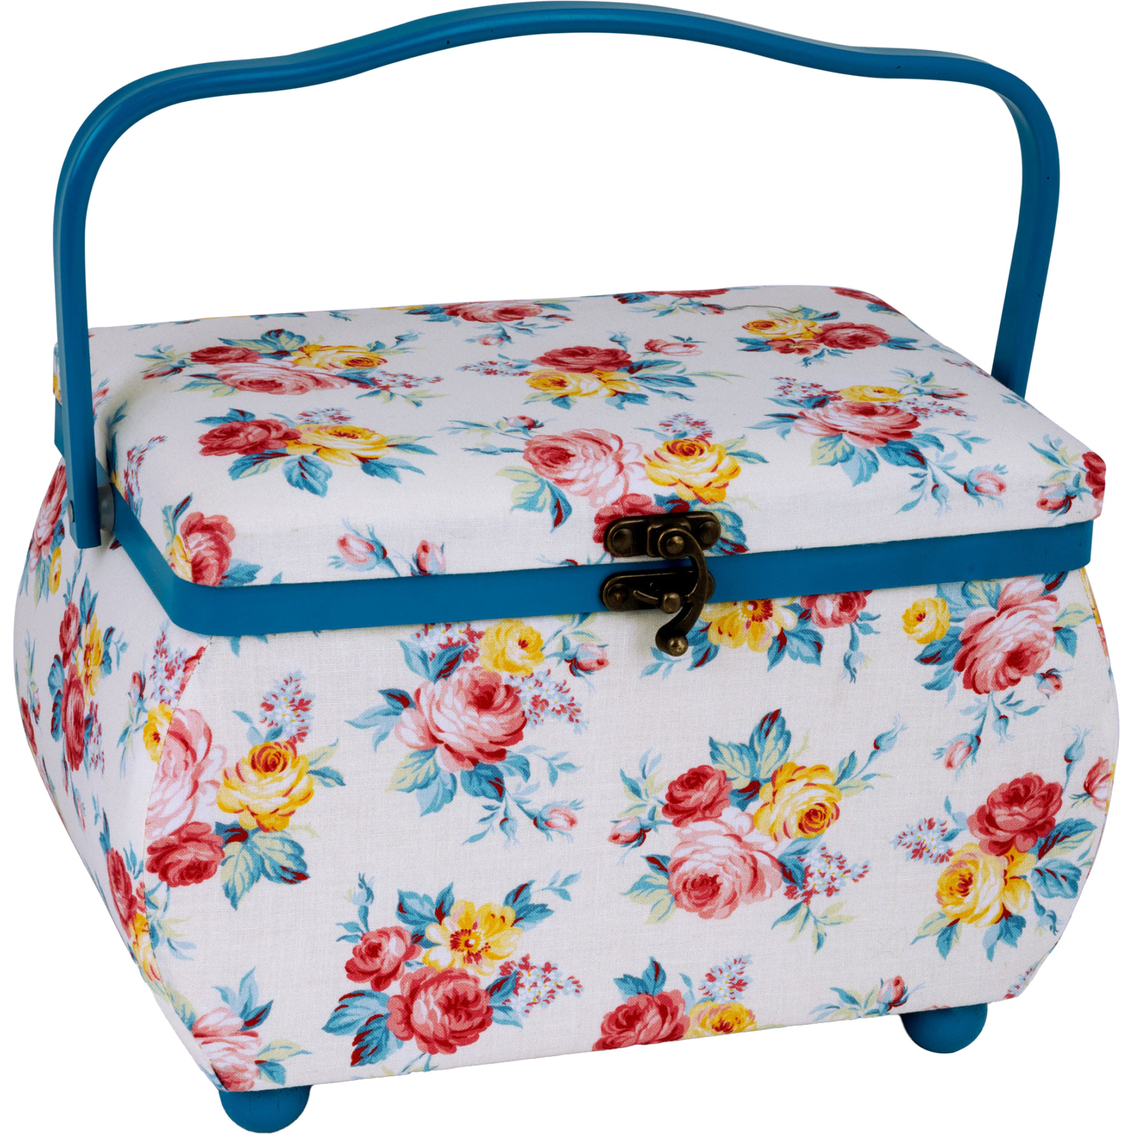 Dritz Curved Sewing Basket, Medium - Image 2 of 6